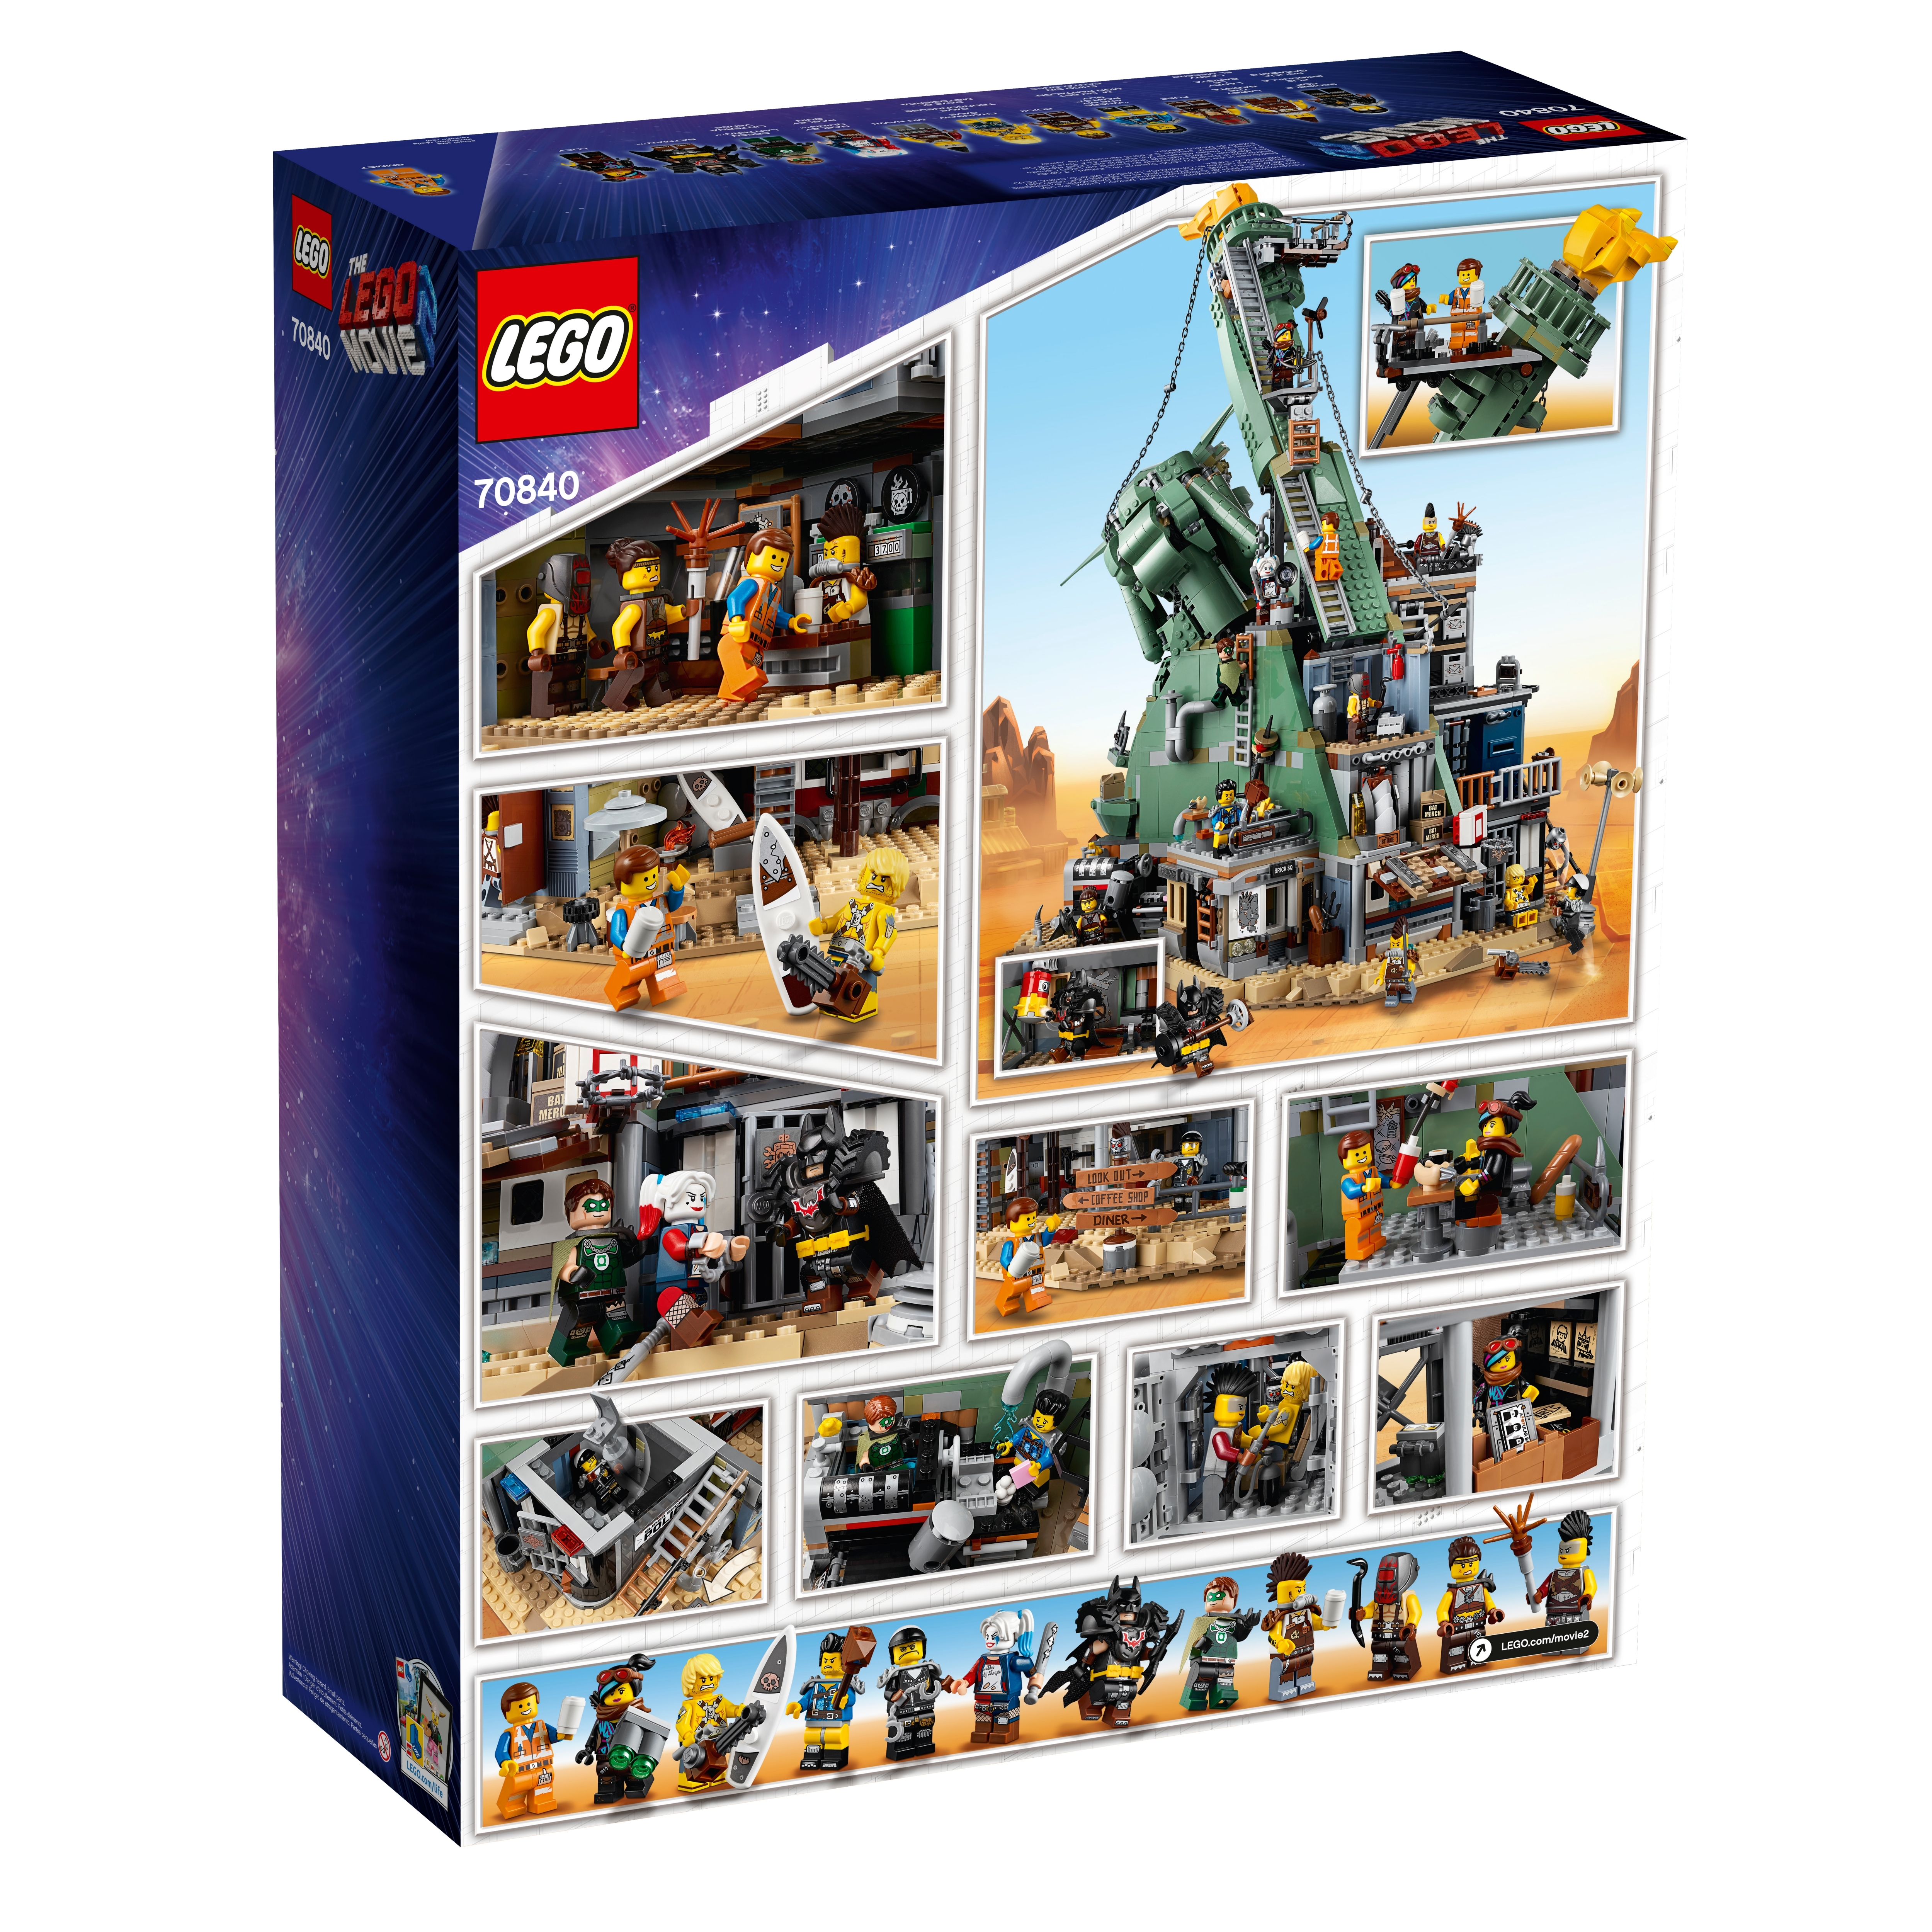 Welcome to Apocalypseburg! 70840 | THE LEGO® MOVIE 2™ Buy online at the Official LEGO® Shop US